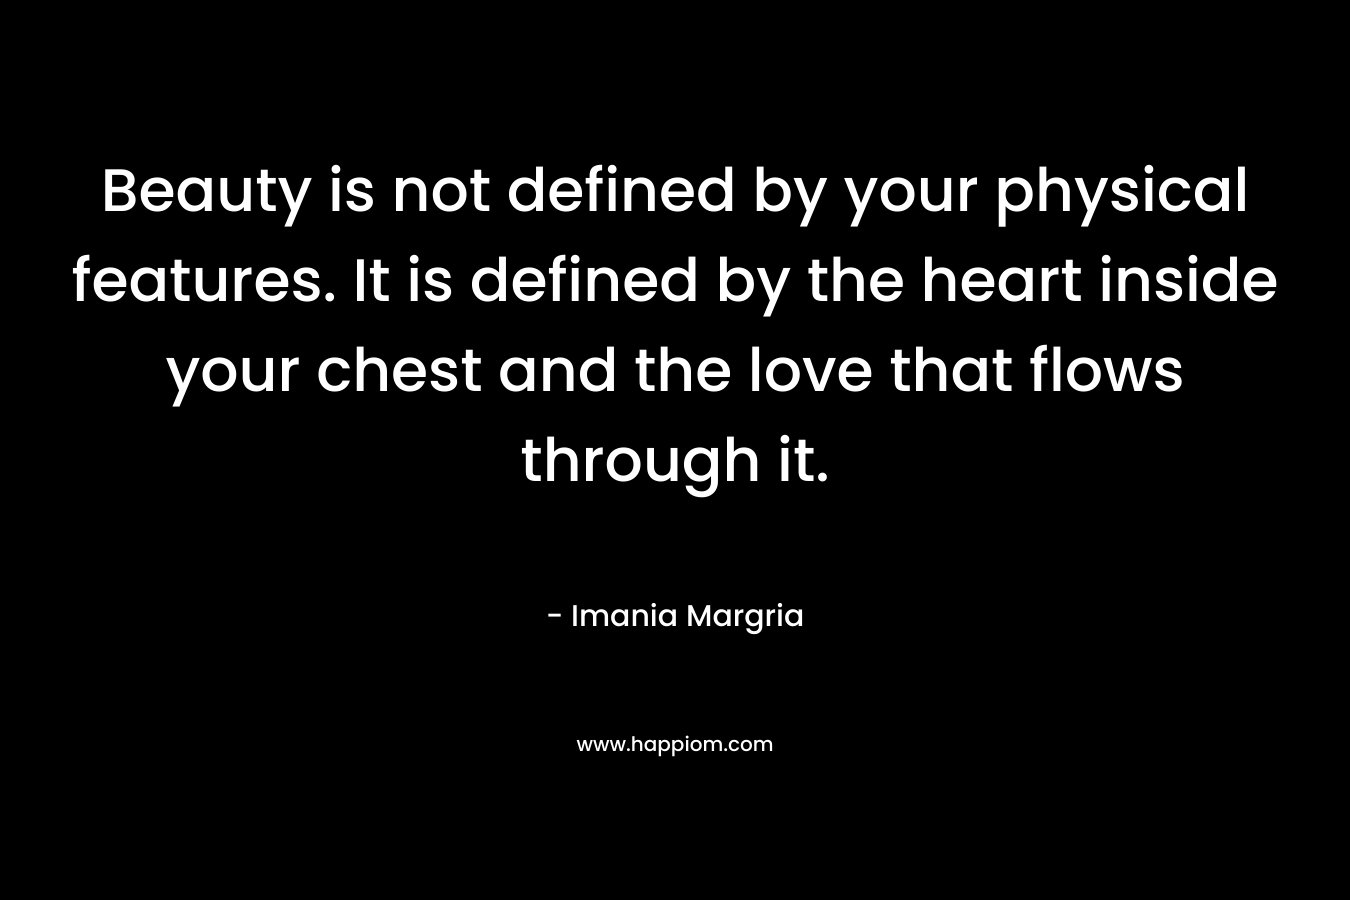 Beauty is not defined by your physical features. It is defined by the heart inside your chest and the love that flows through it.